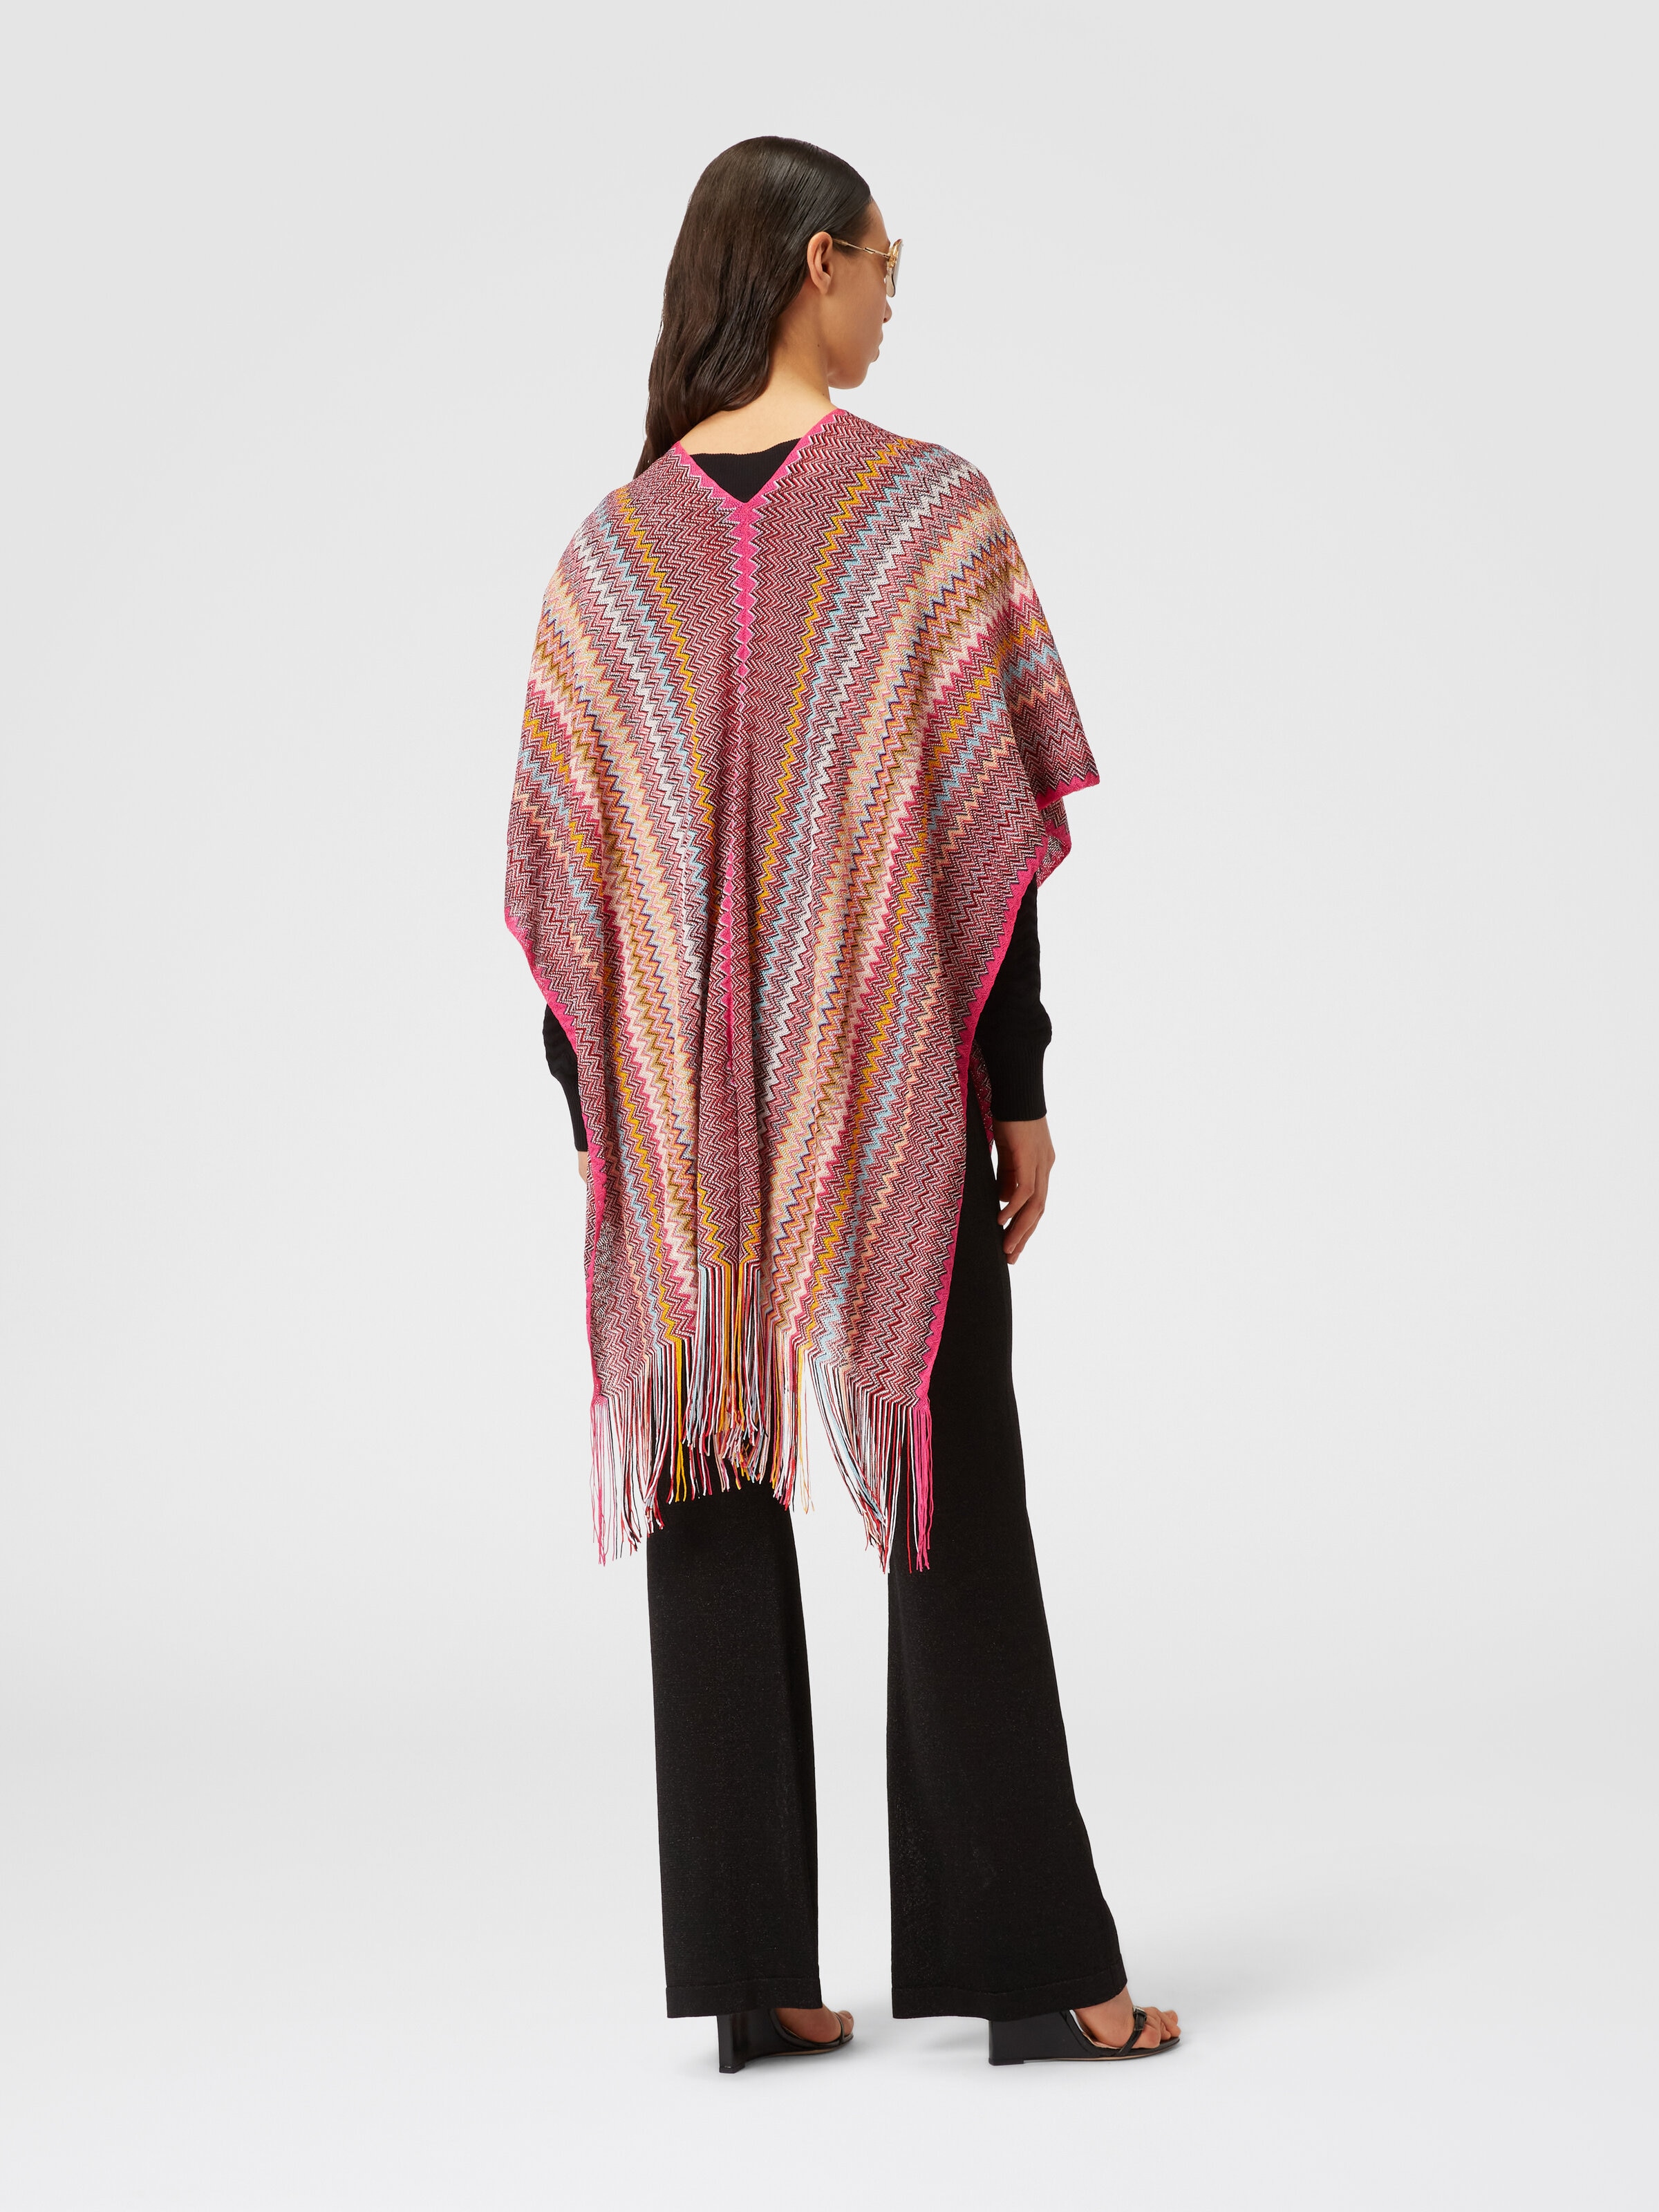 Poncho in zigzag viscose knit with fringes, Multicoloured  - 2